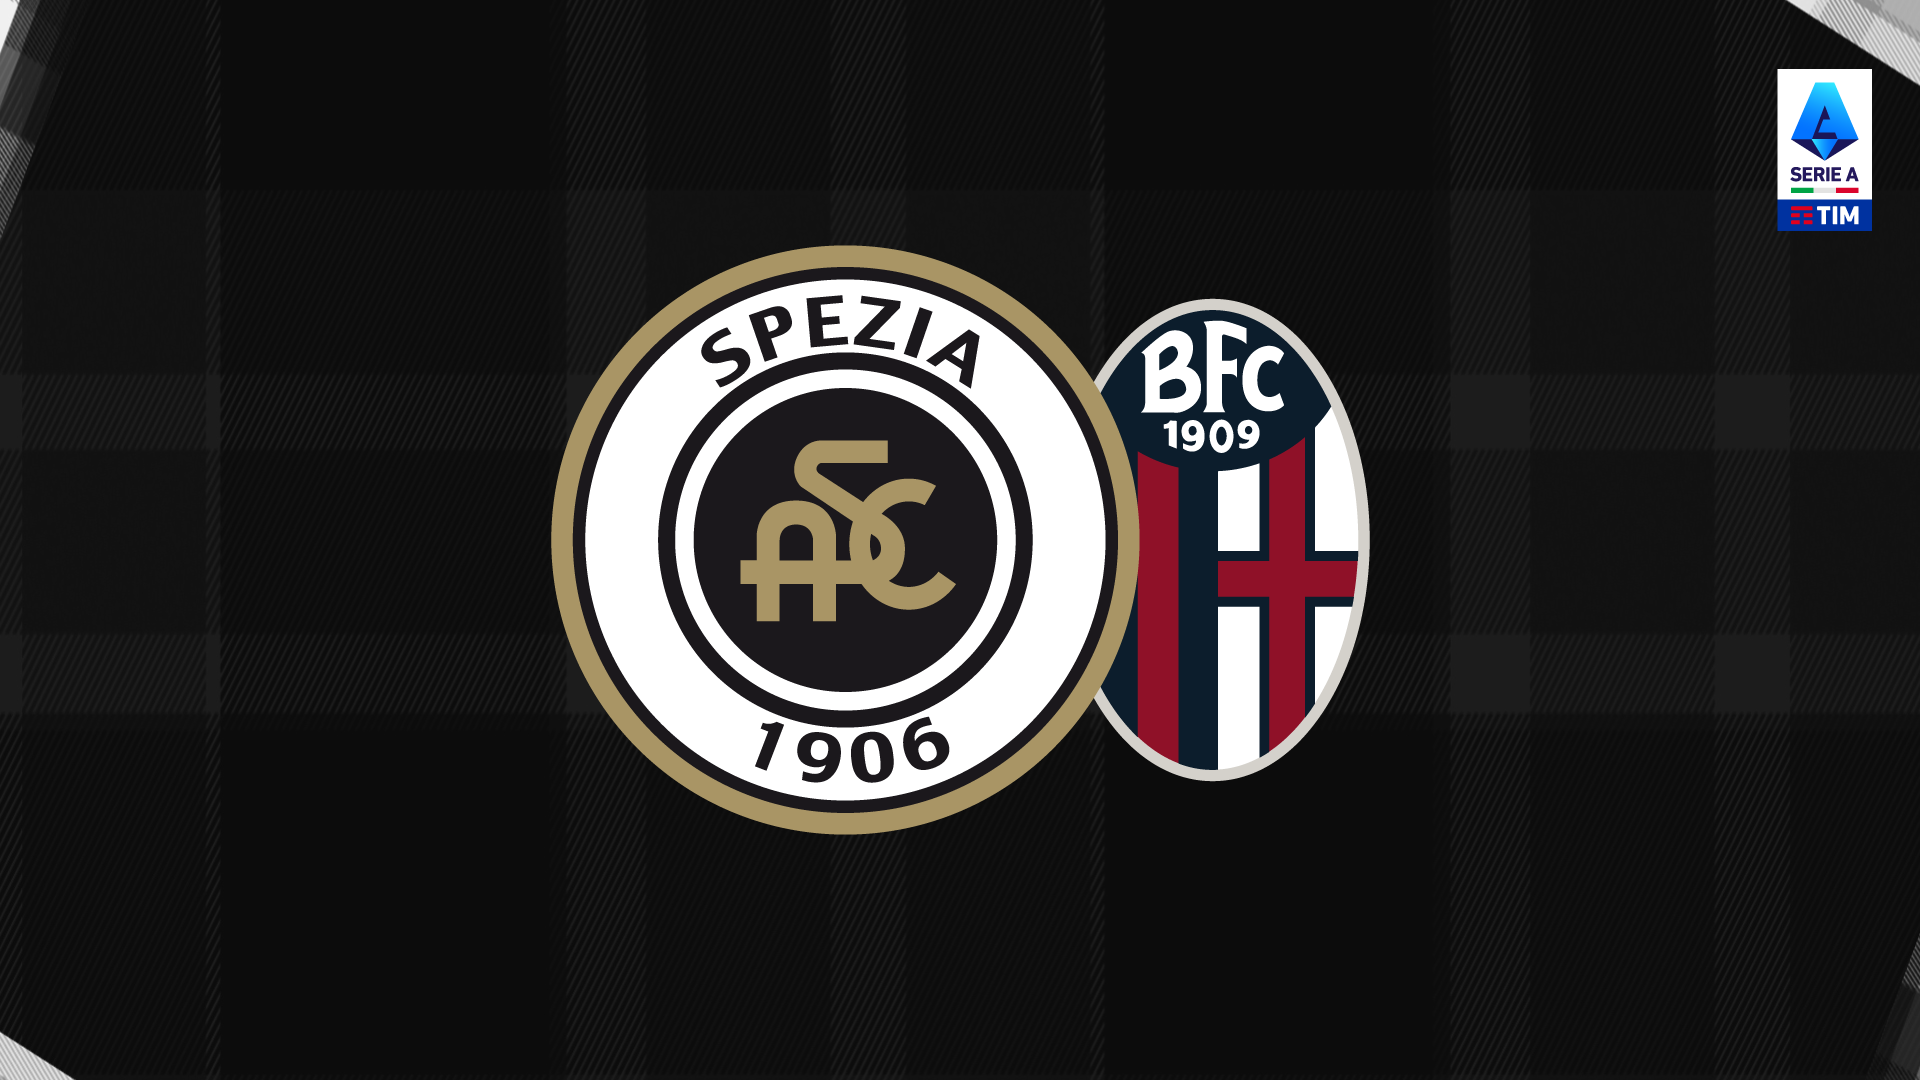 Spezia-Bologna: general ticket sale open from August 30